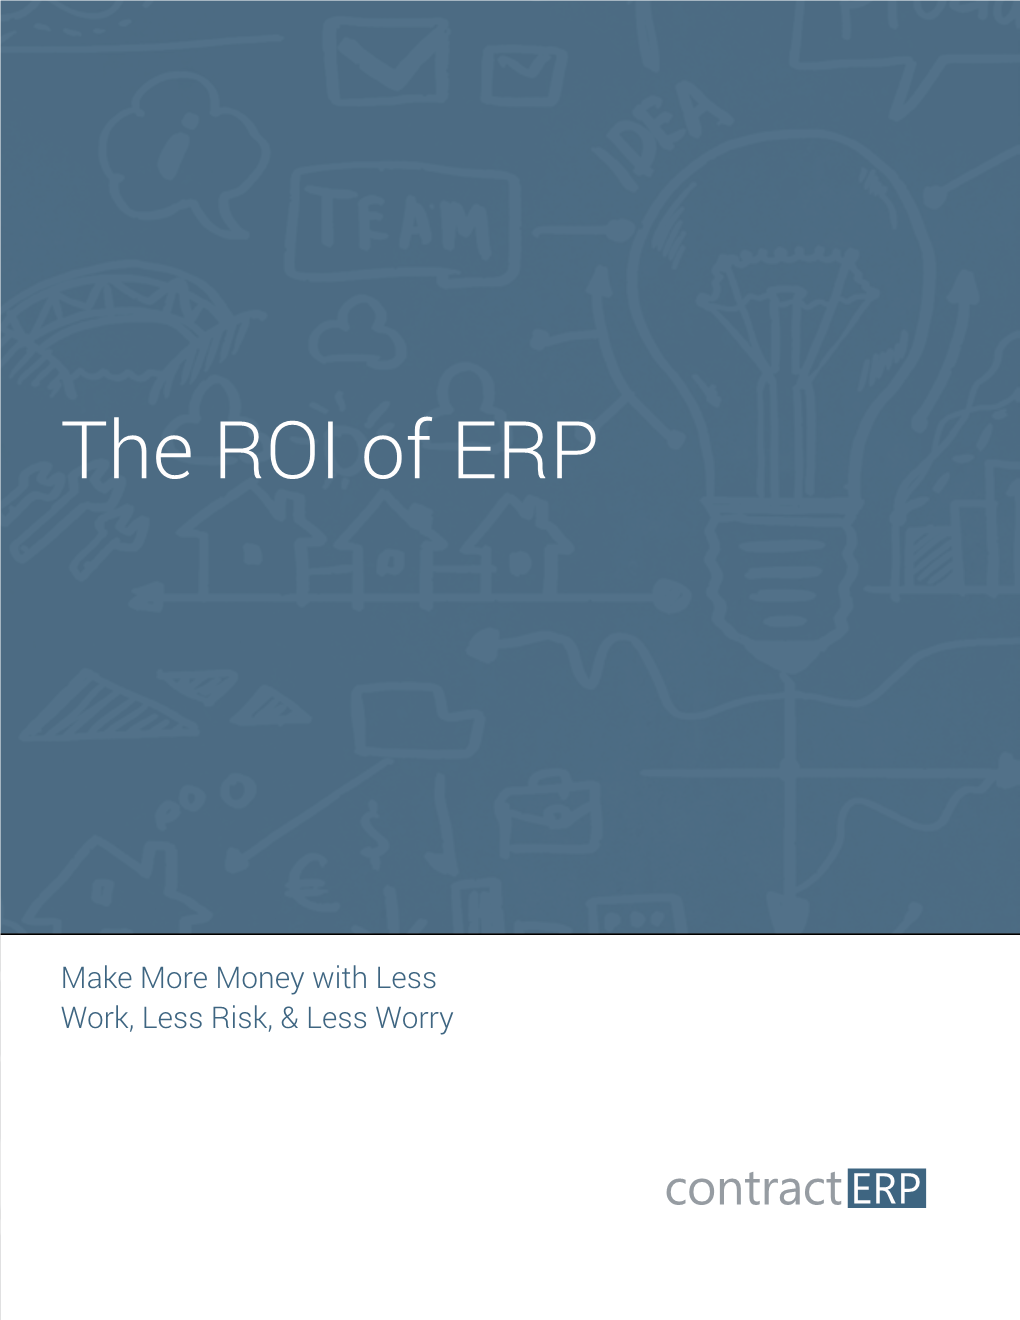 The ROI of ERP